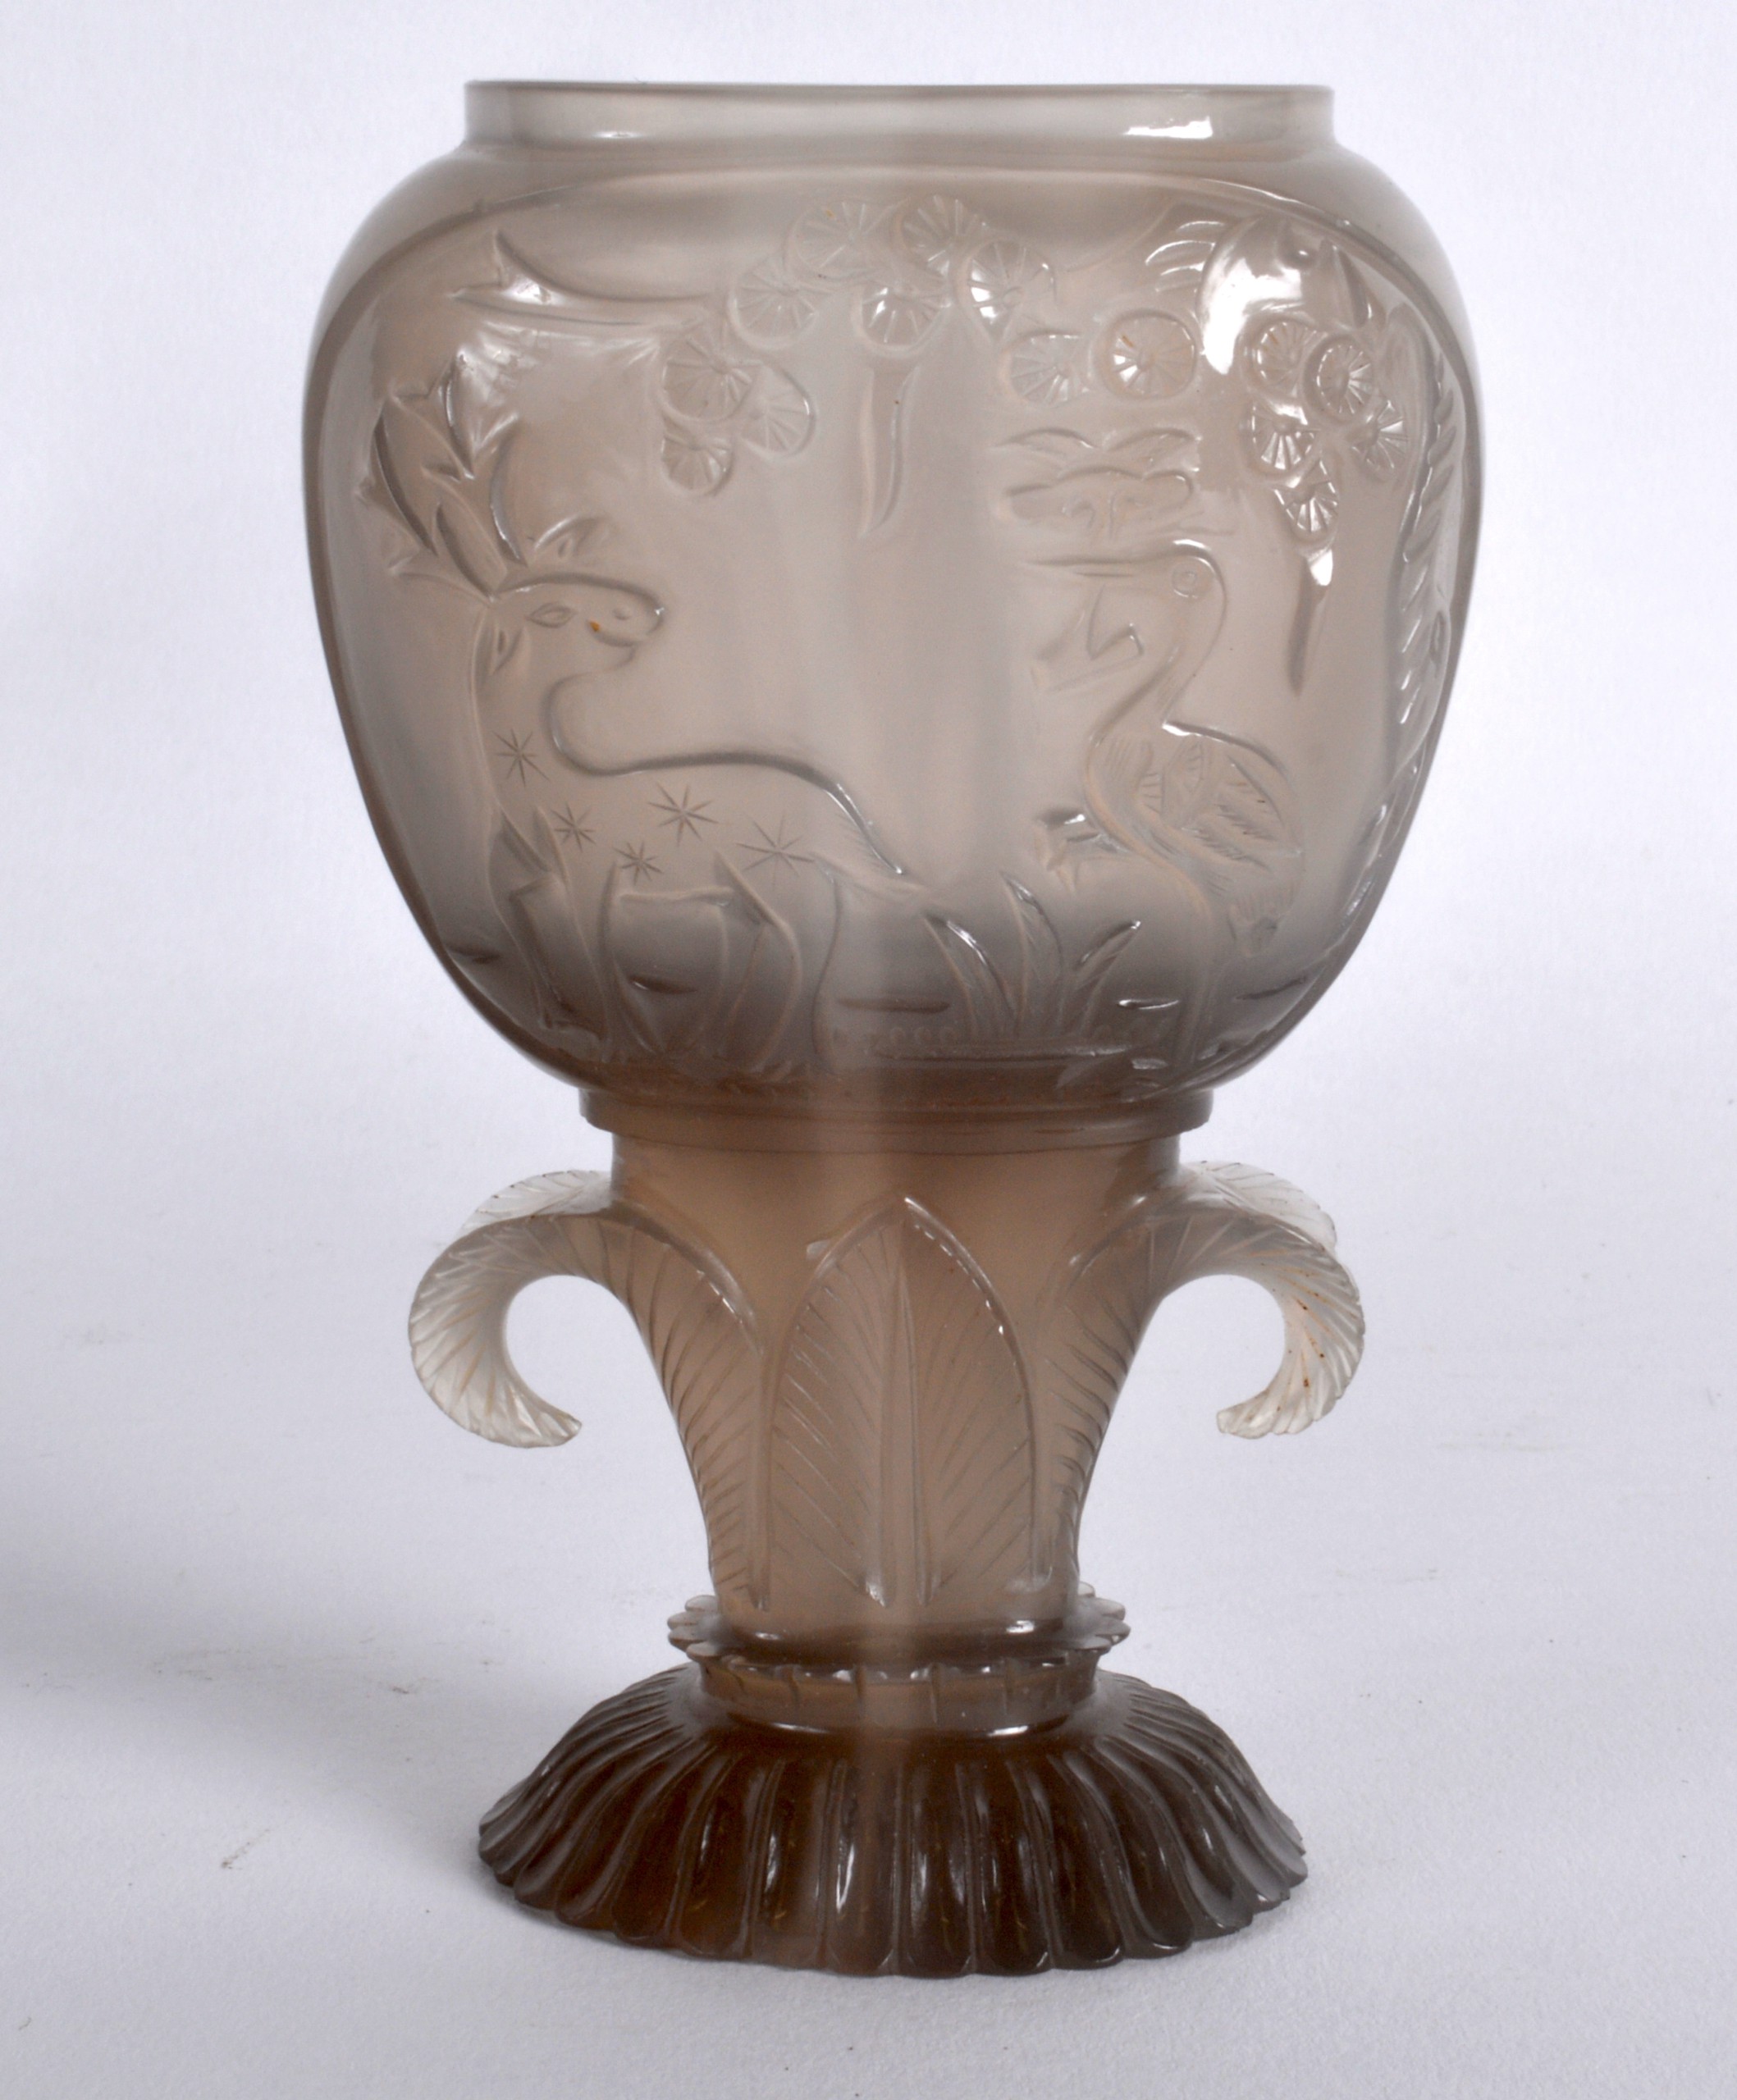 A CHINESE QING DYNASTY MUGHAL STYLE AGATE VASE decorated with animals and flowers, upon a - Image 2 of 2